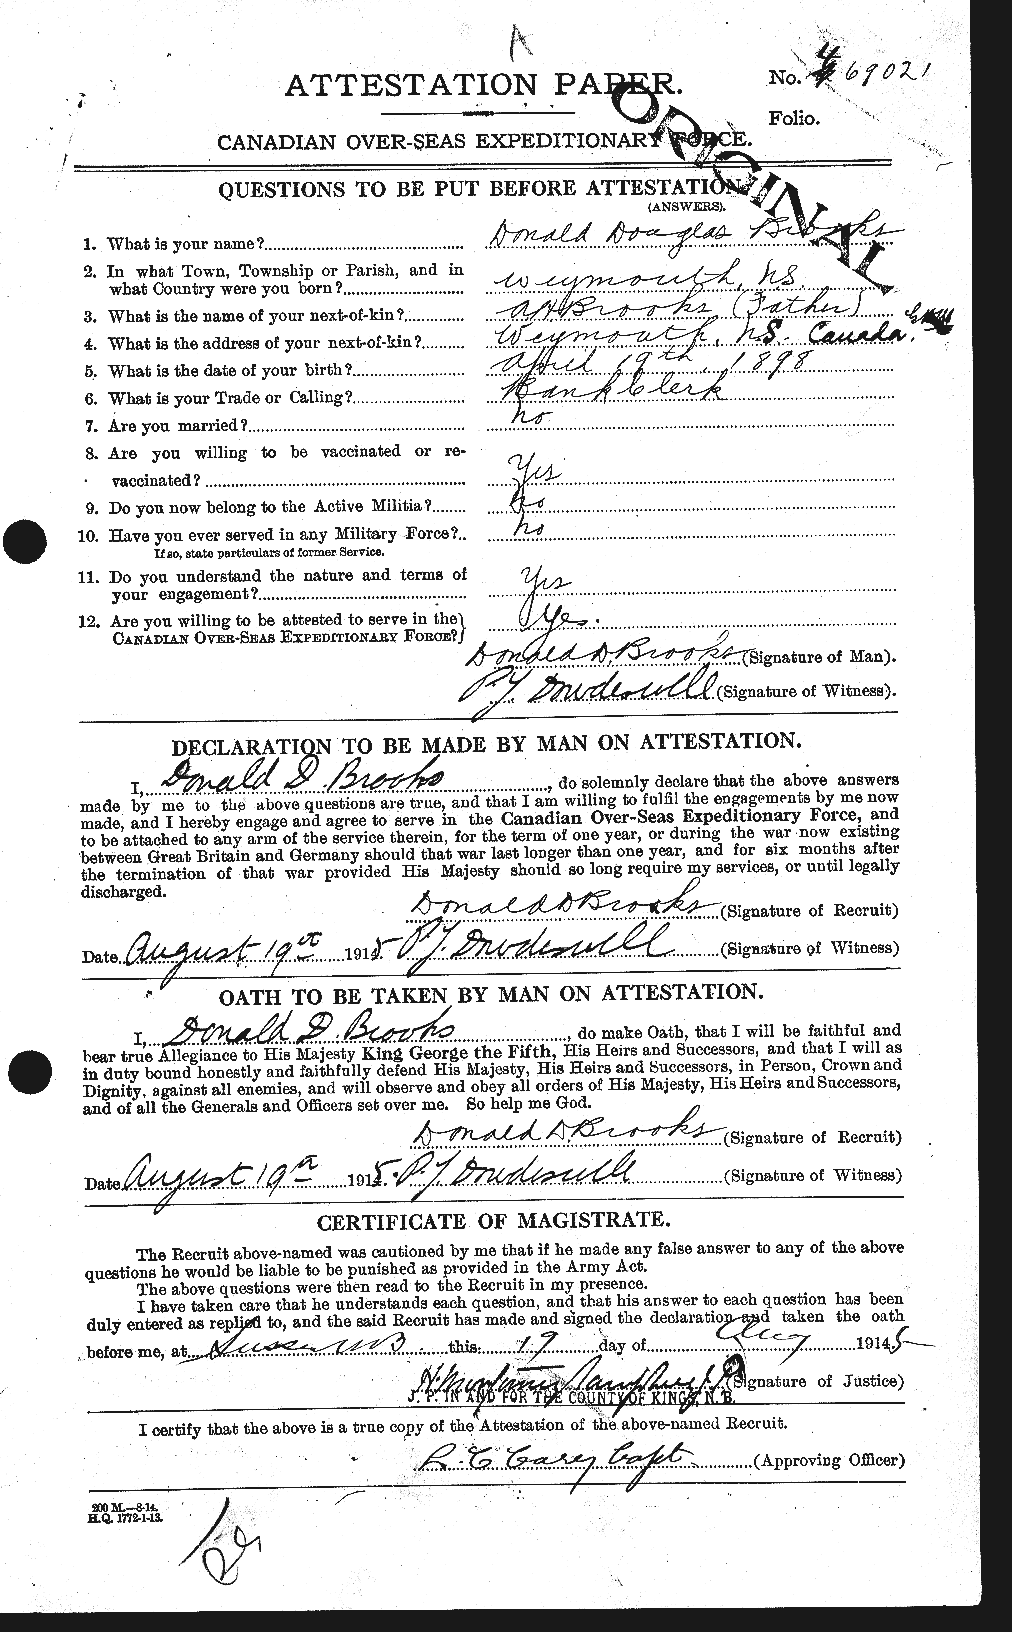 Personnel Records of the First World War - CEF 261556a